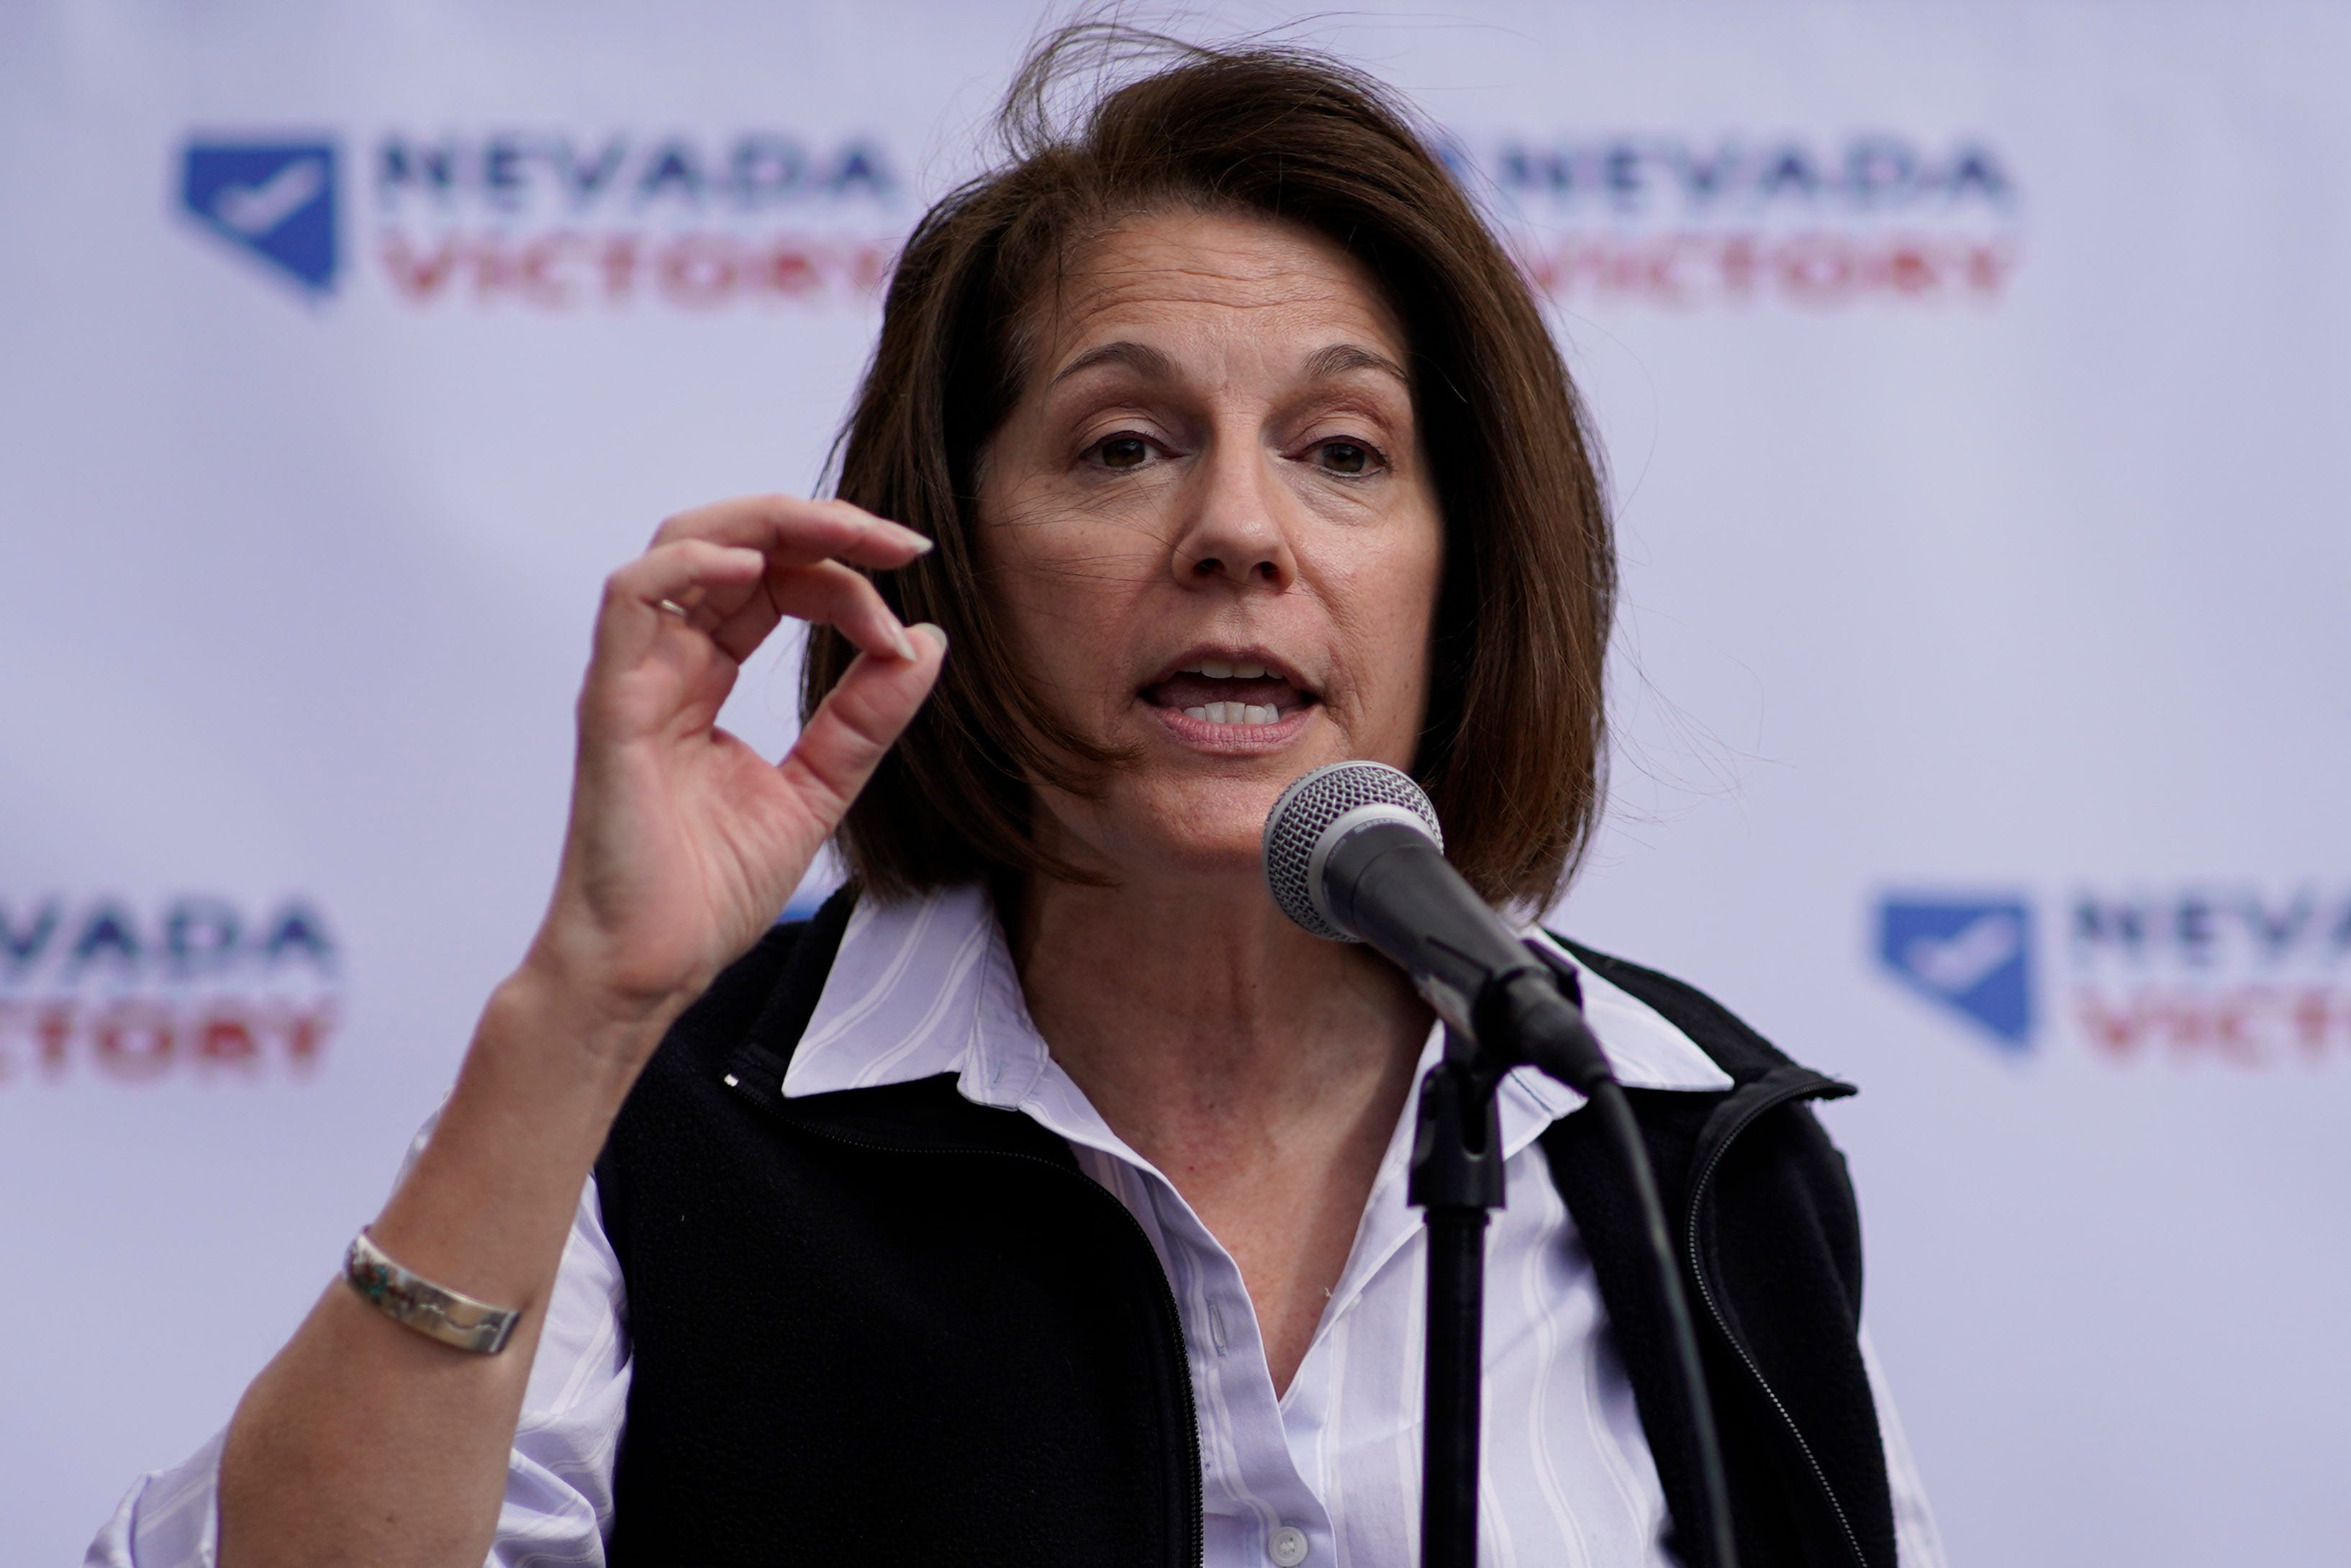 Sen. Catherine Cortez Masto, D-Nev., speaks during a get-out-the-vote rally Saturday, Oct. 22, 2022, in Las Vegas. Masto is running against Republican candidate Adam Laxalt. (AP Photo/John Locher) ORG XMIT: NVJL126